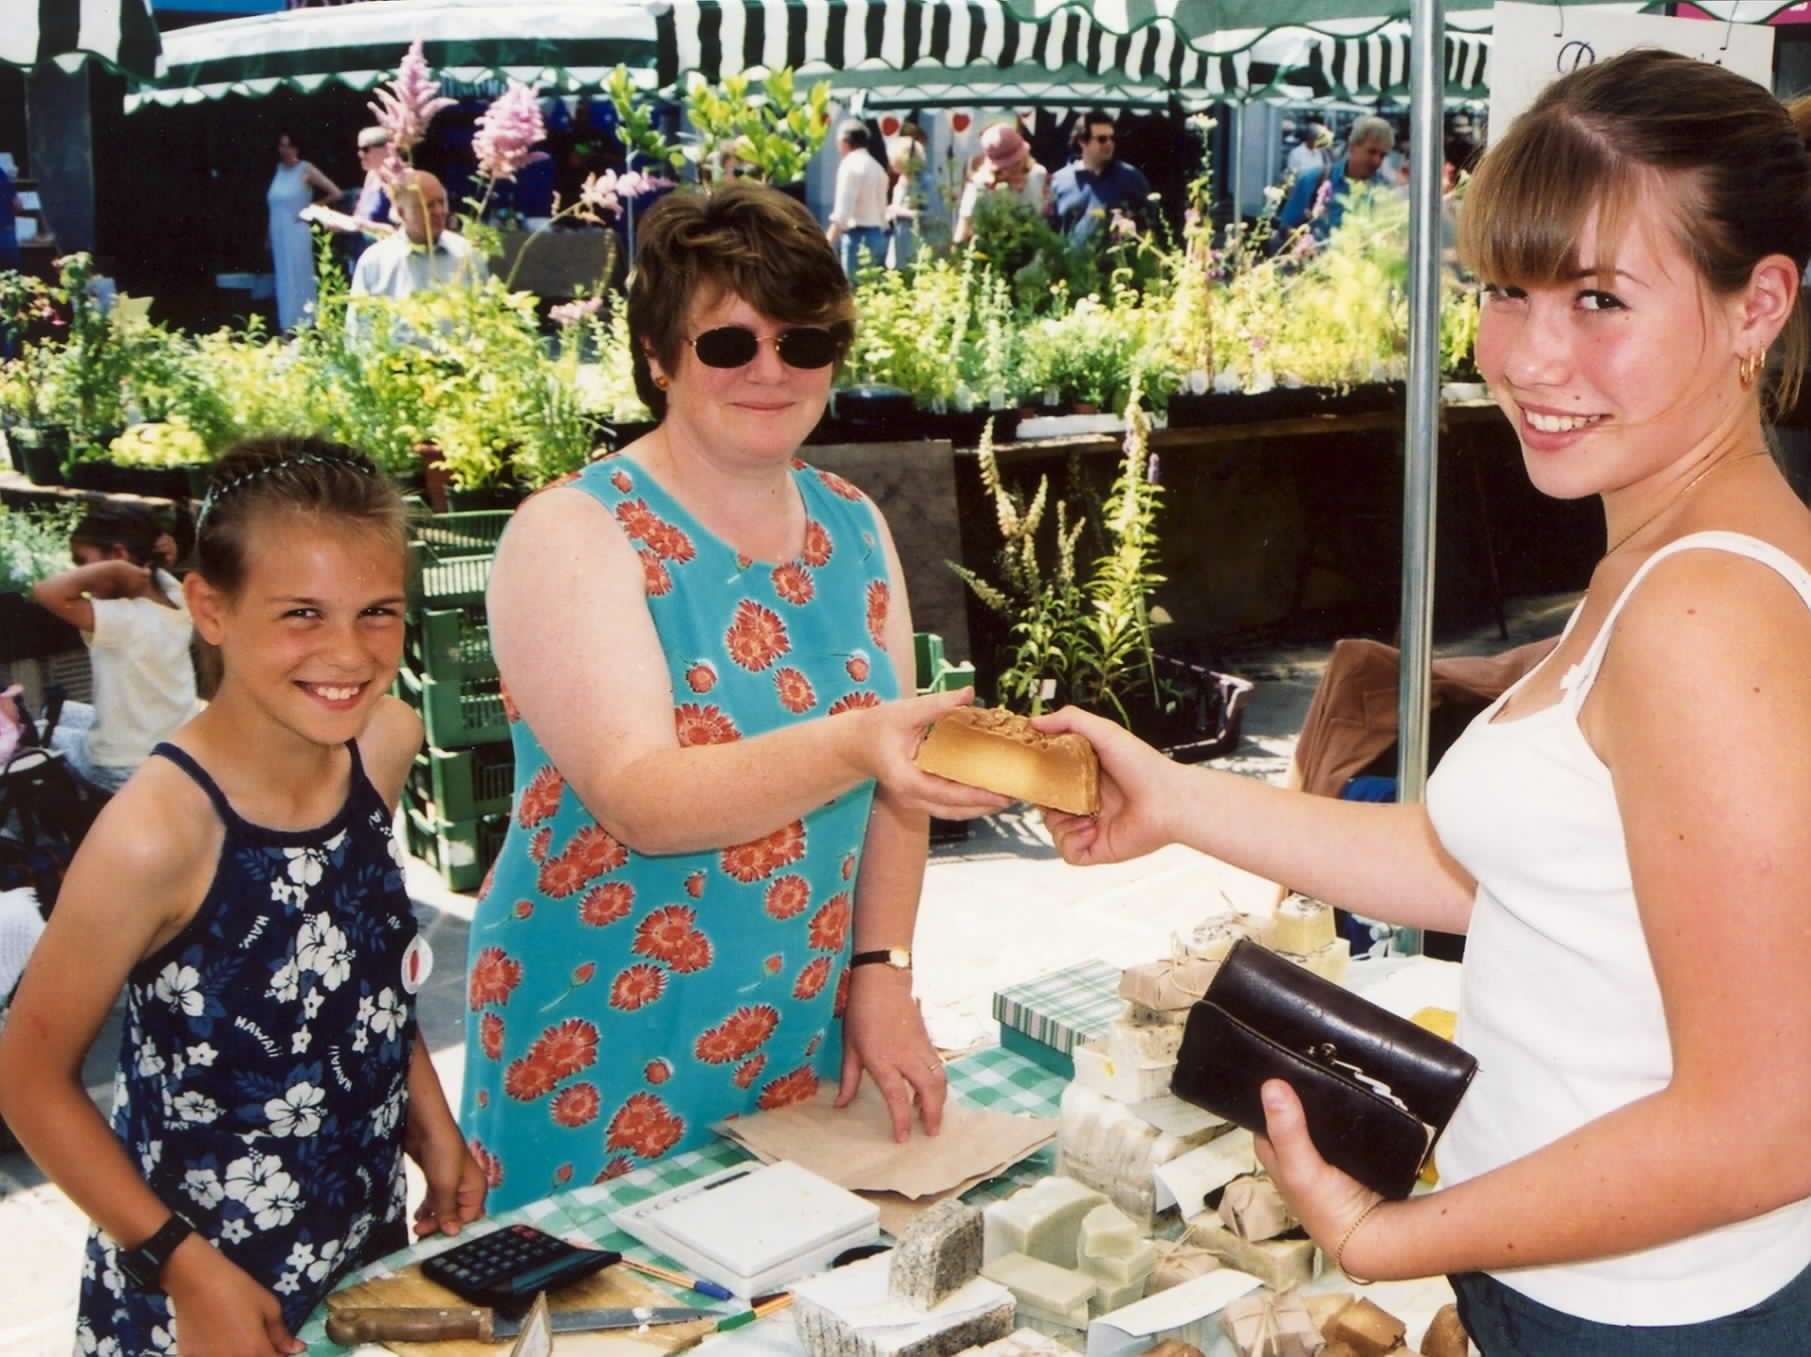 One of the stalls at Ashford market in 1999